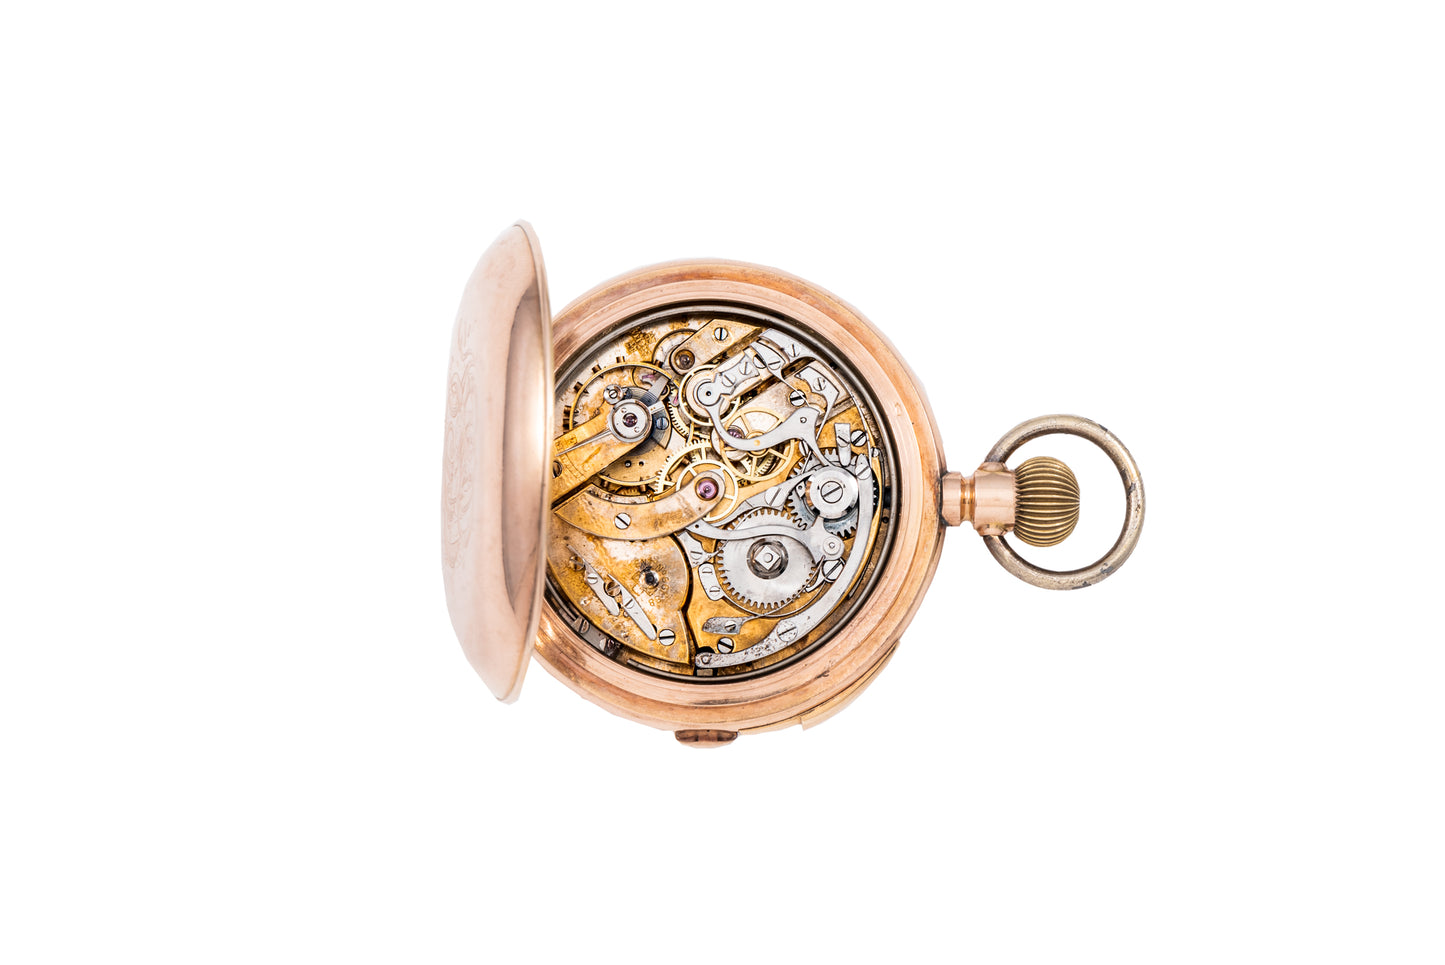 E. Mathey Tissot & Cie. Minute Repeater Stopwatch